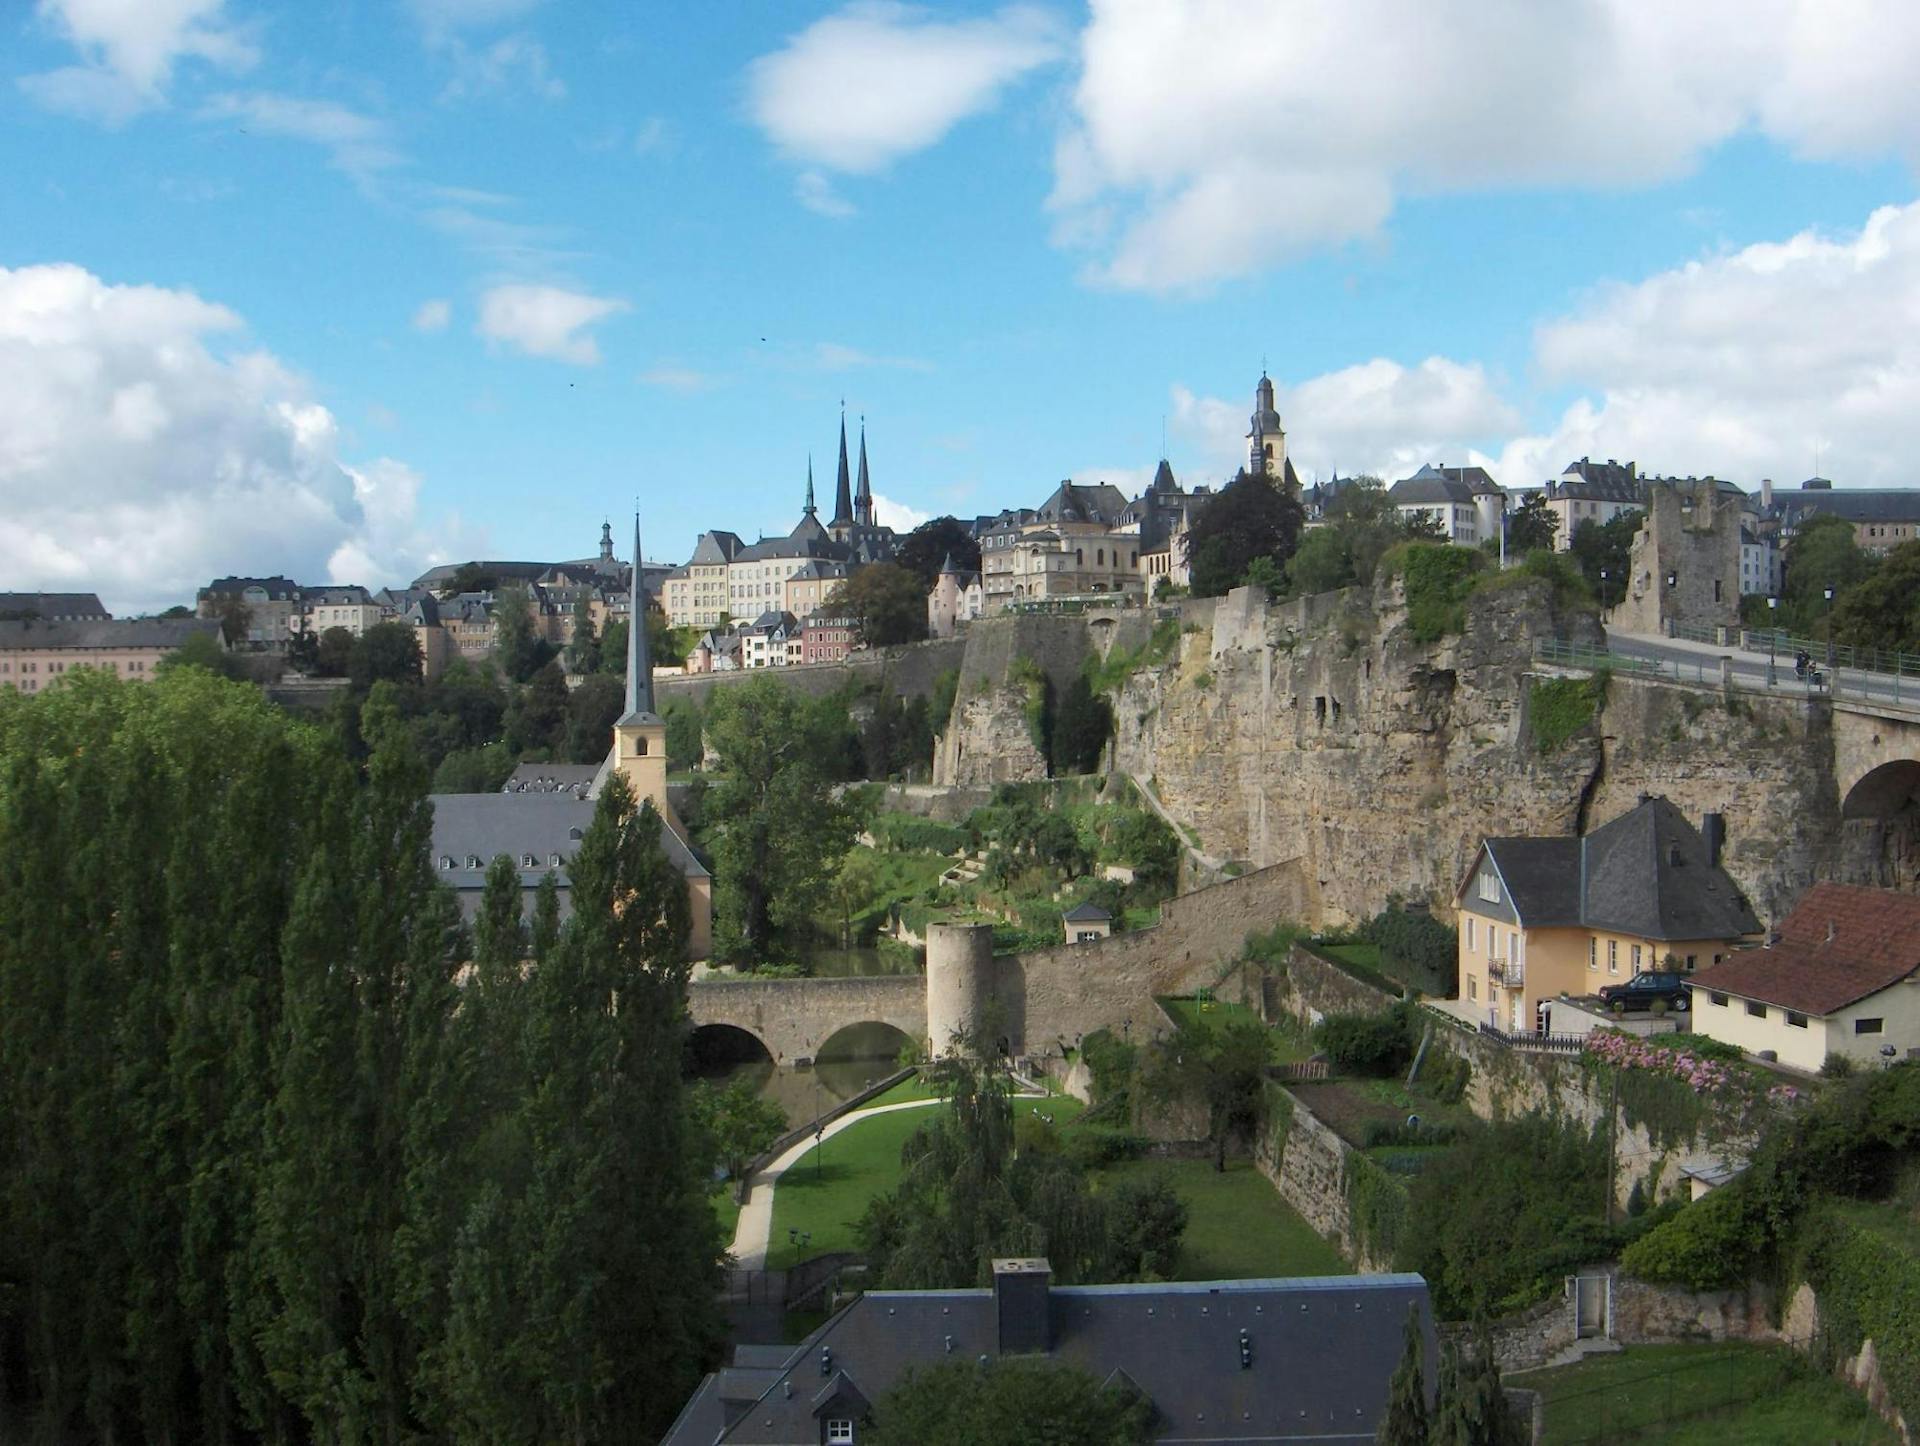 Luxembourg's old quarters and fortifications, source: Wikipedia